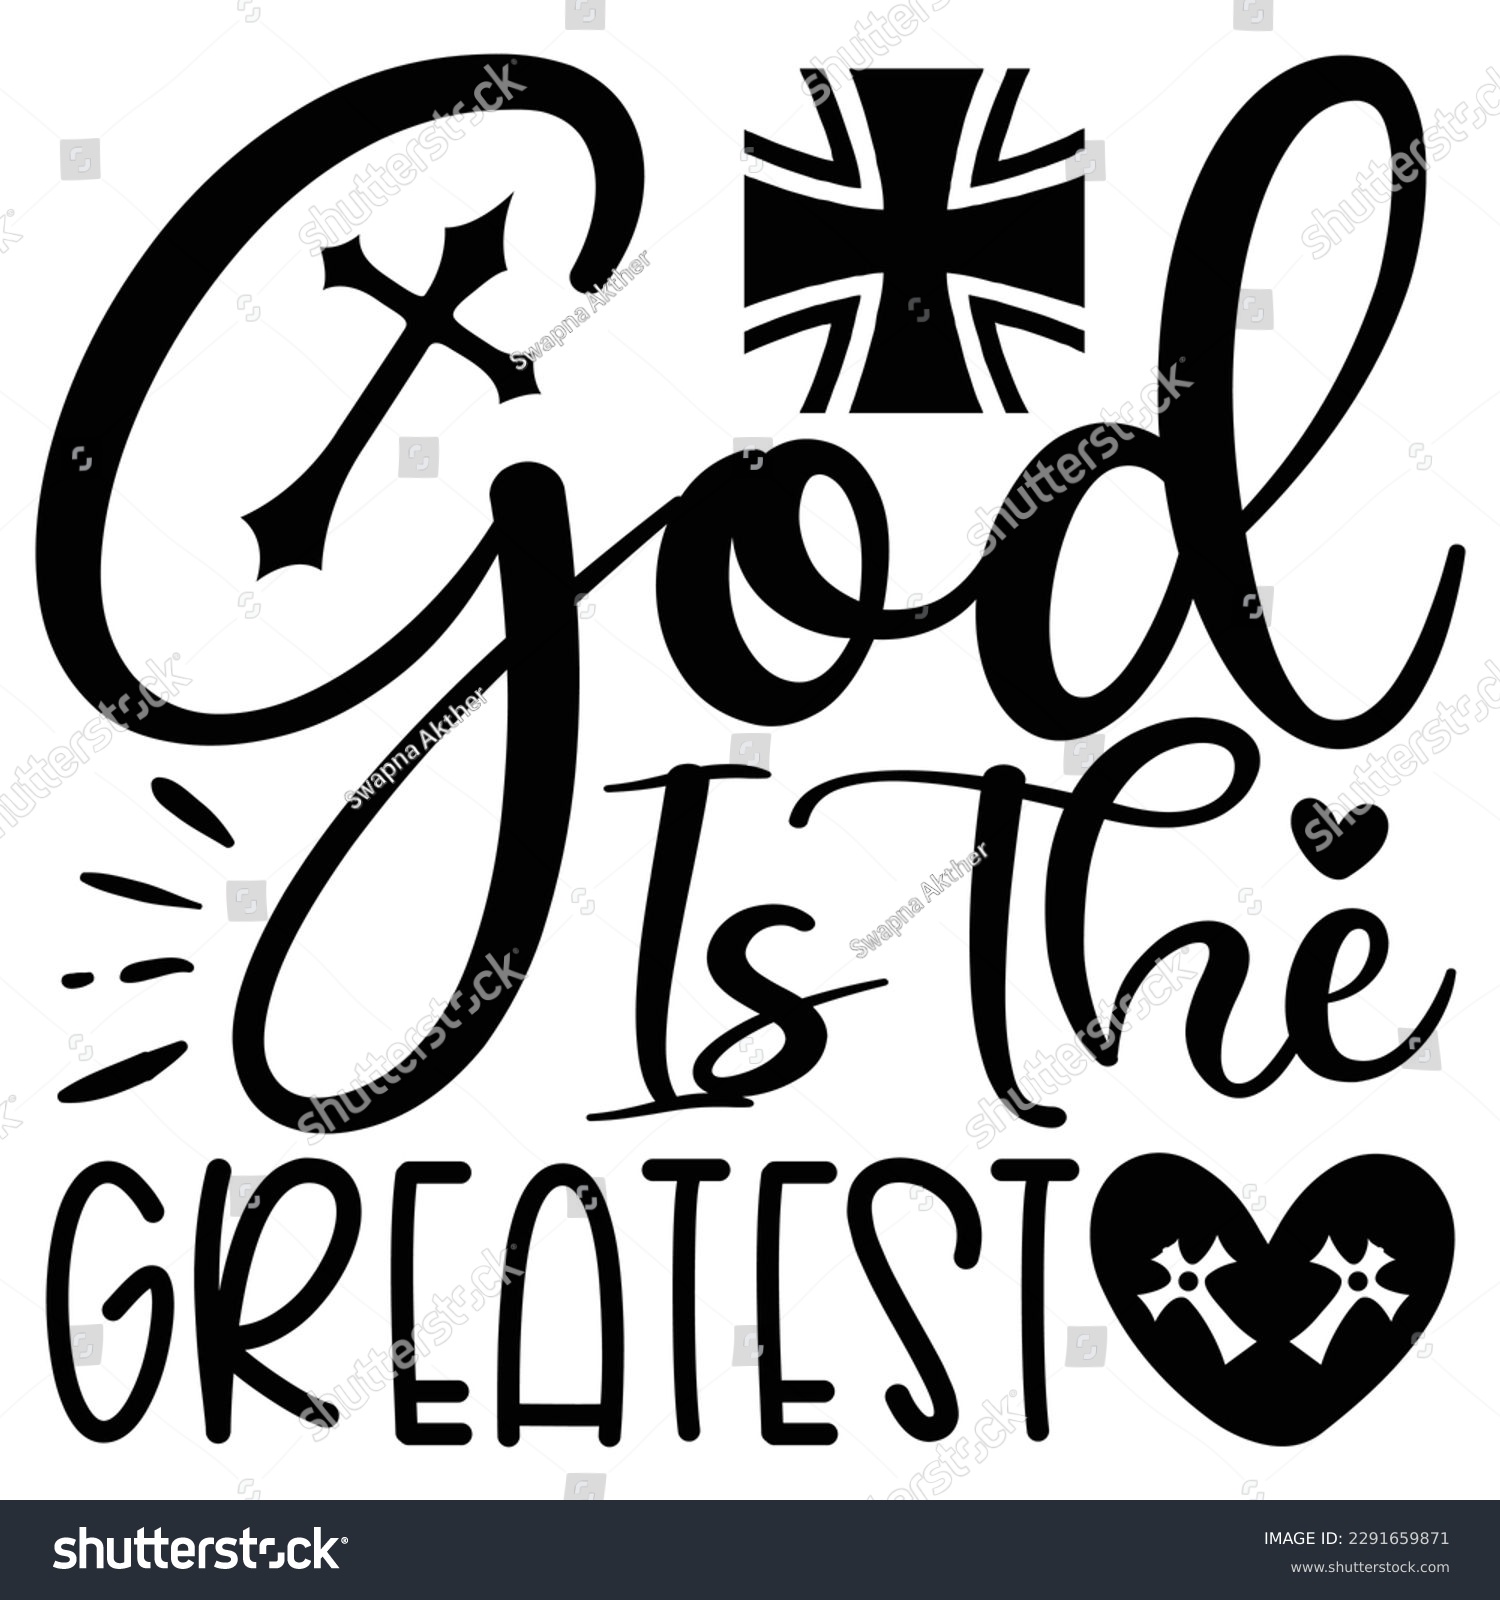 SVG of God Is The Greatest - Jesus Christian SVG And T-shirt Design, Jesus Christian SVG Quotes Design t shirt, Vector EPS Editable Files, can you download this Design. svg